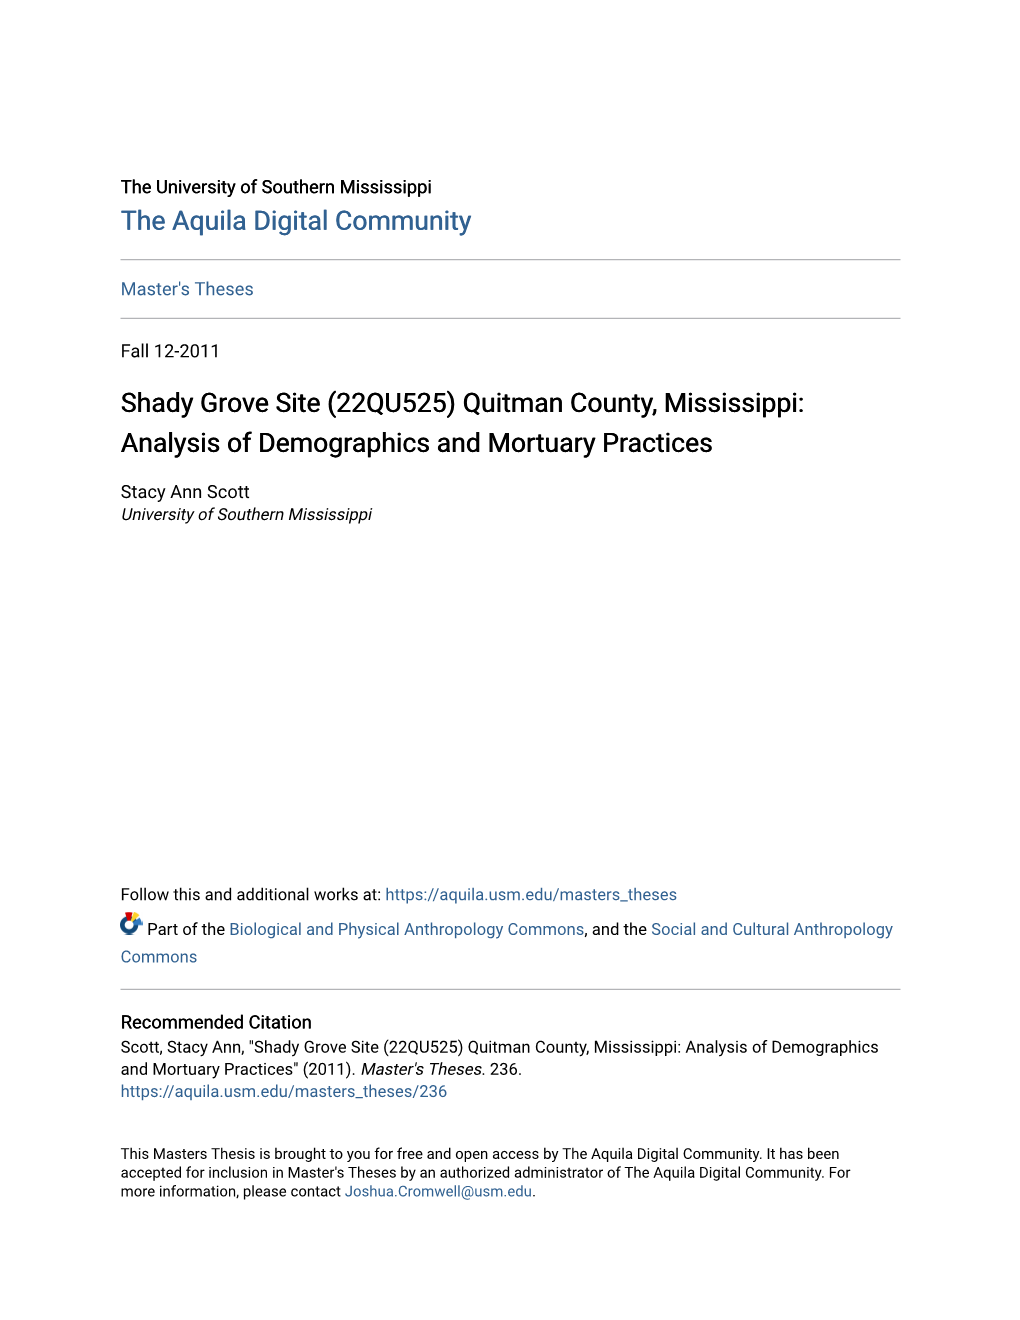 Quitman County, Mississippi: Analysis of Demographics and Mortuary Practices